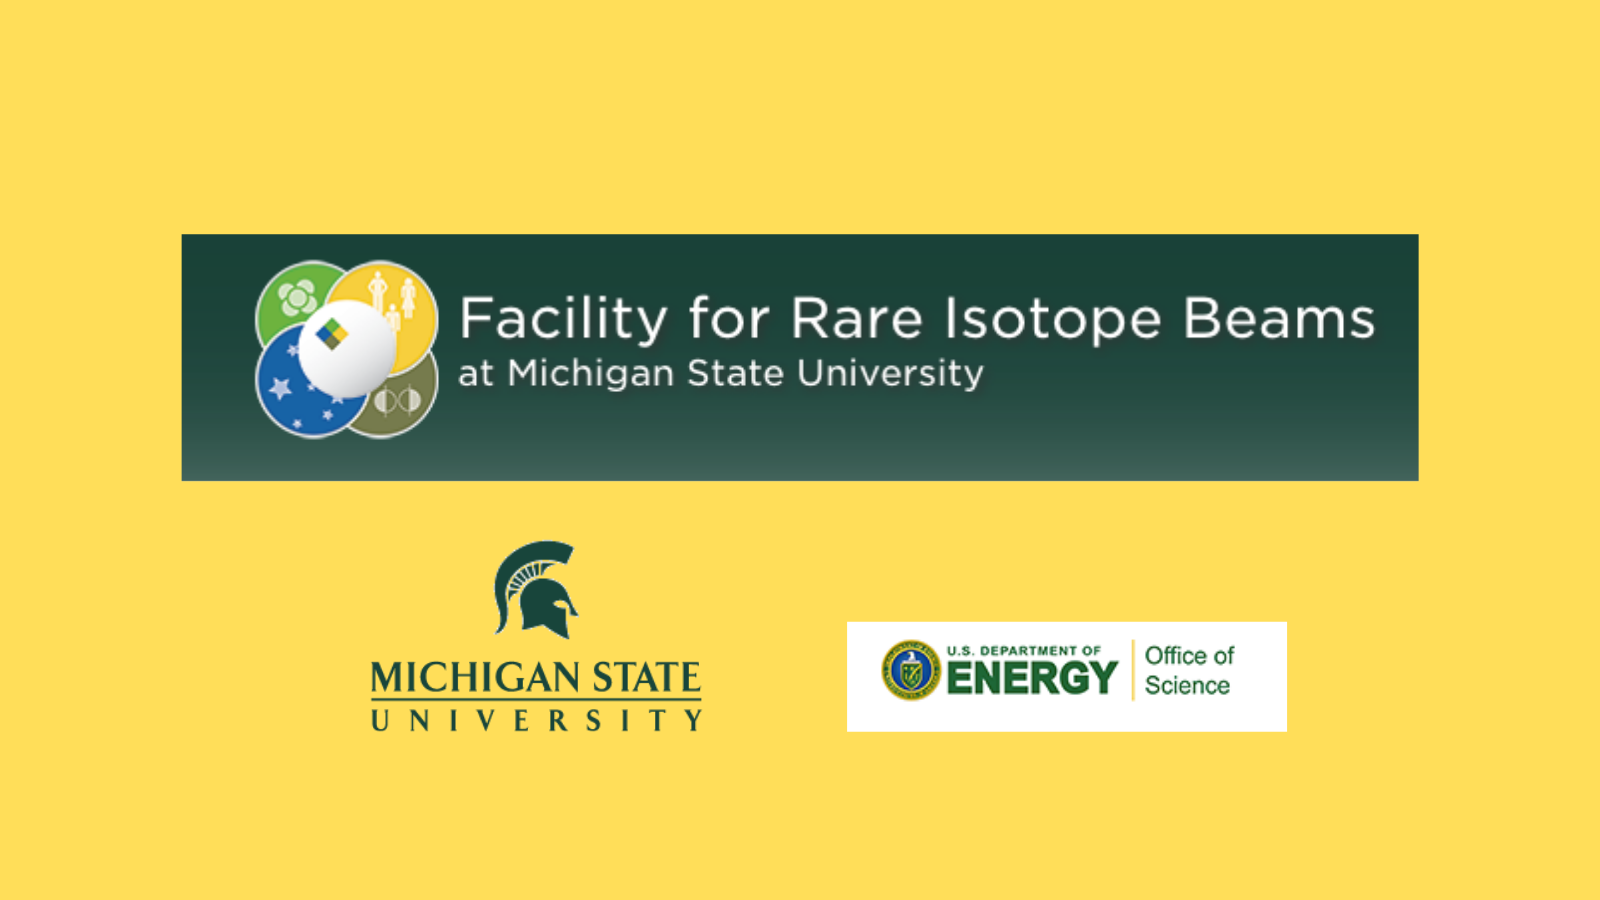 Facility for Rate Isotope Beams logo, MSU wordmark, and US Dept of Energy logo